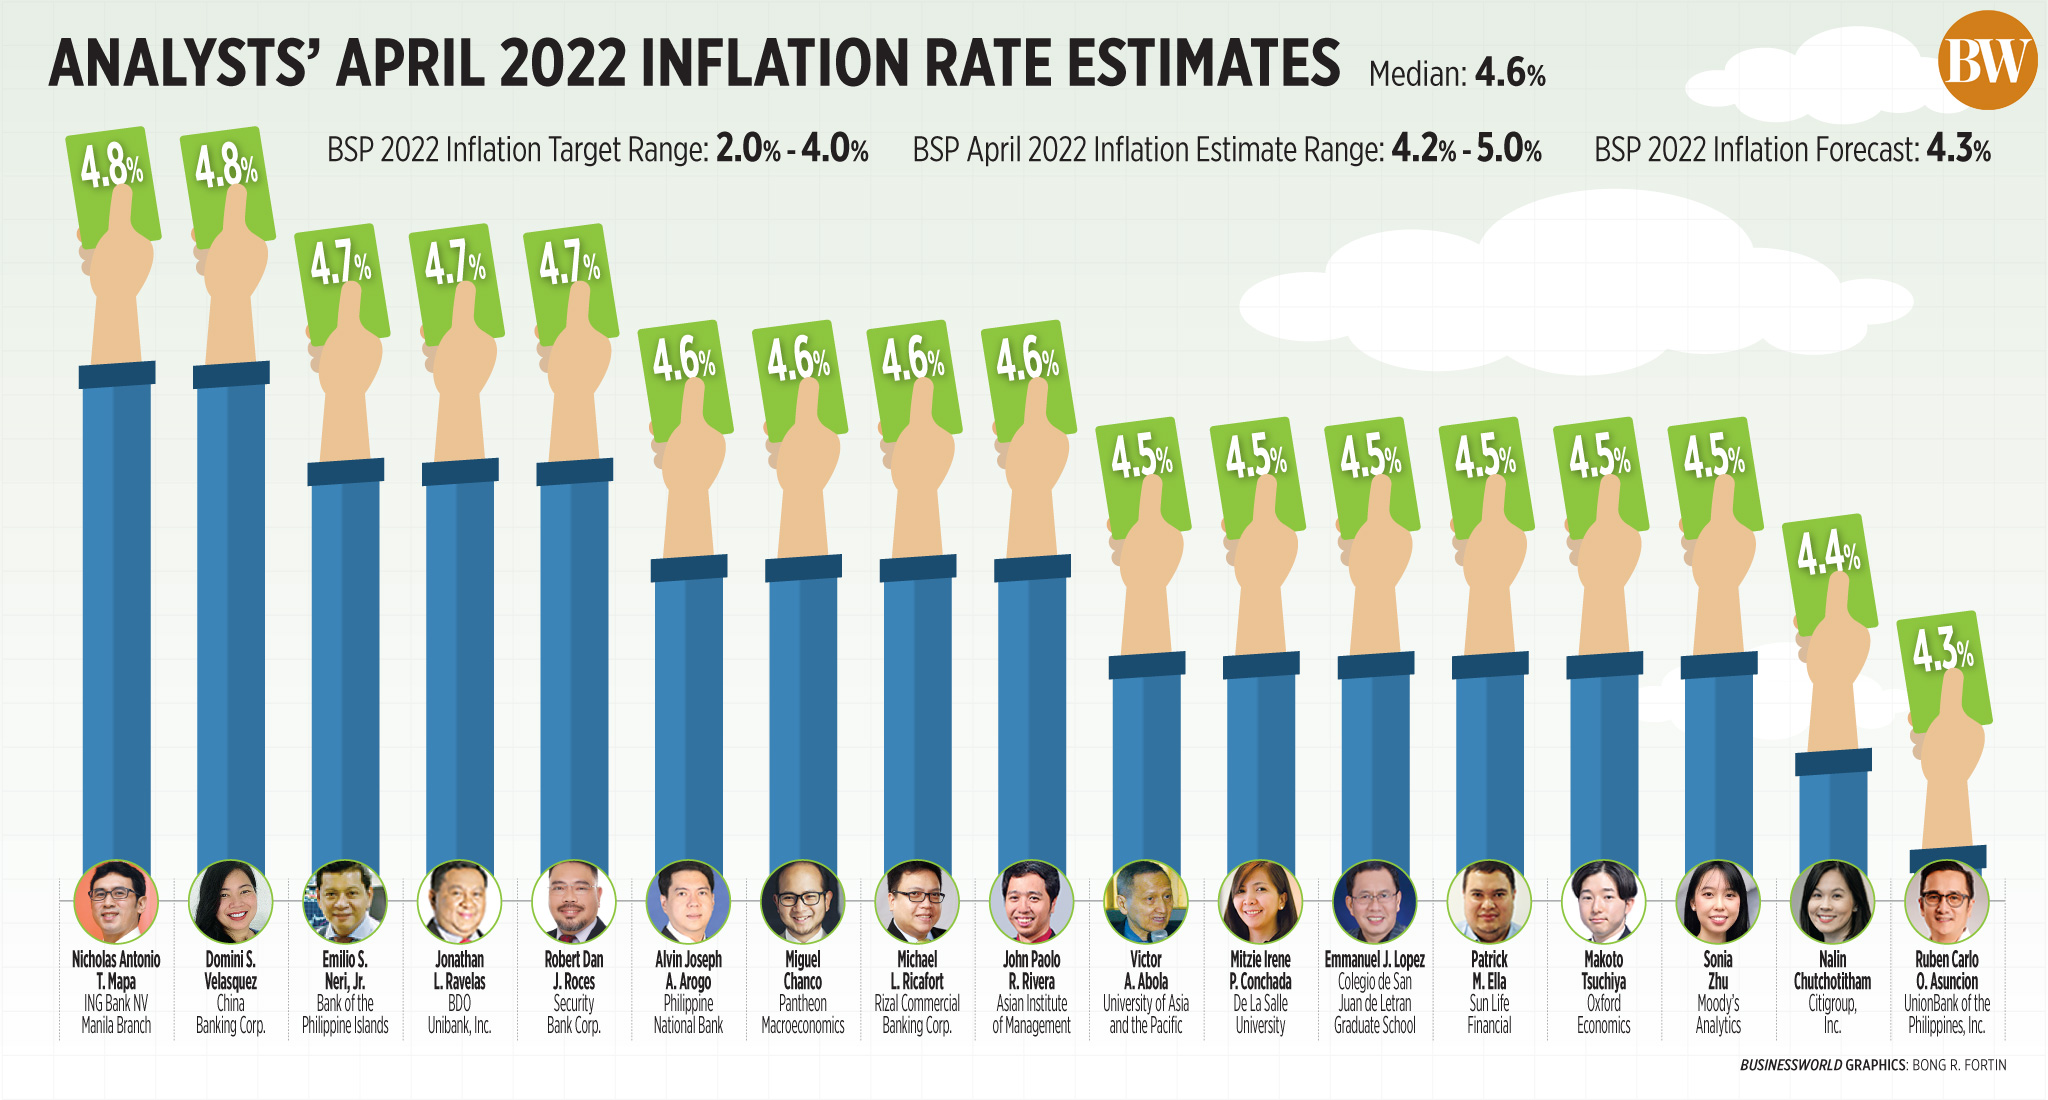 Analysts' inflation rates for April 2022